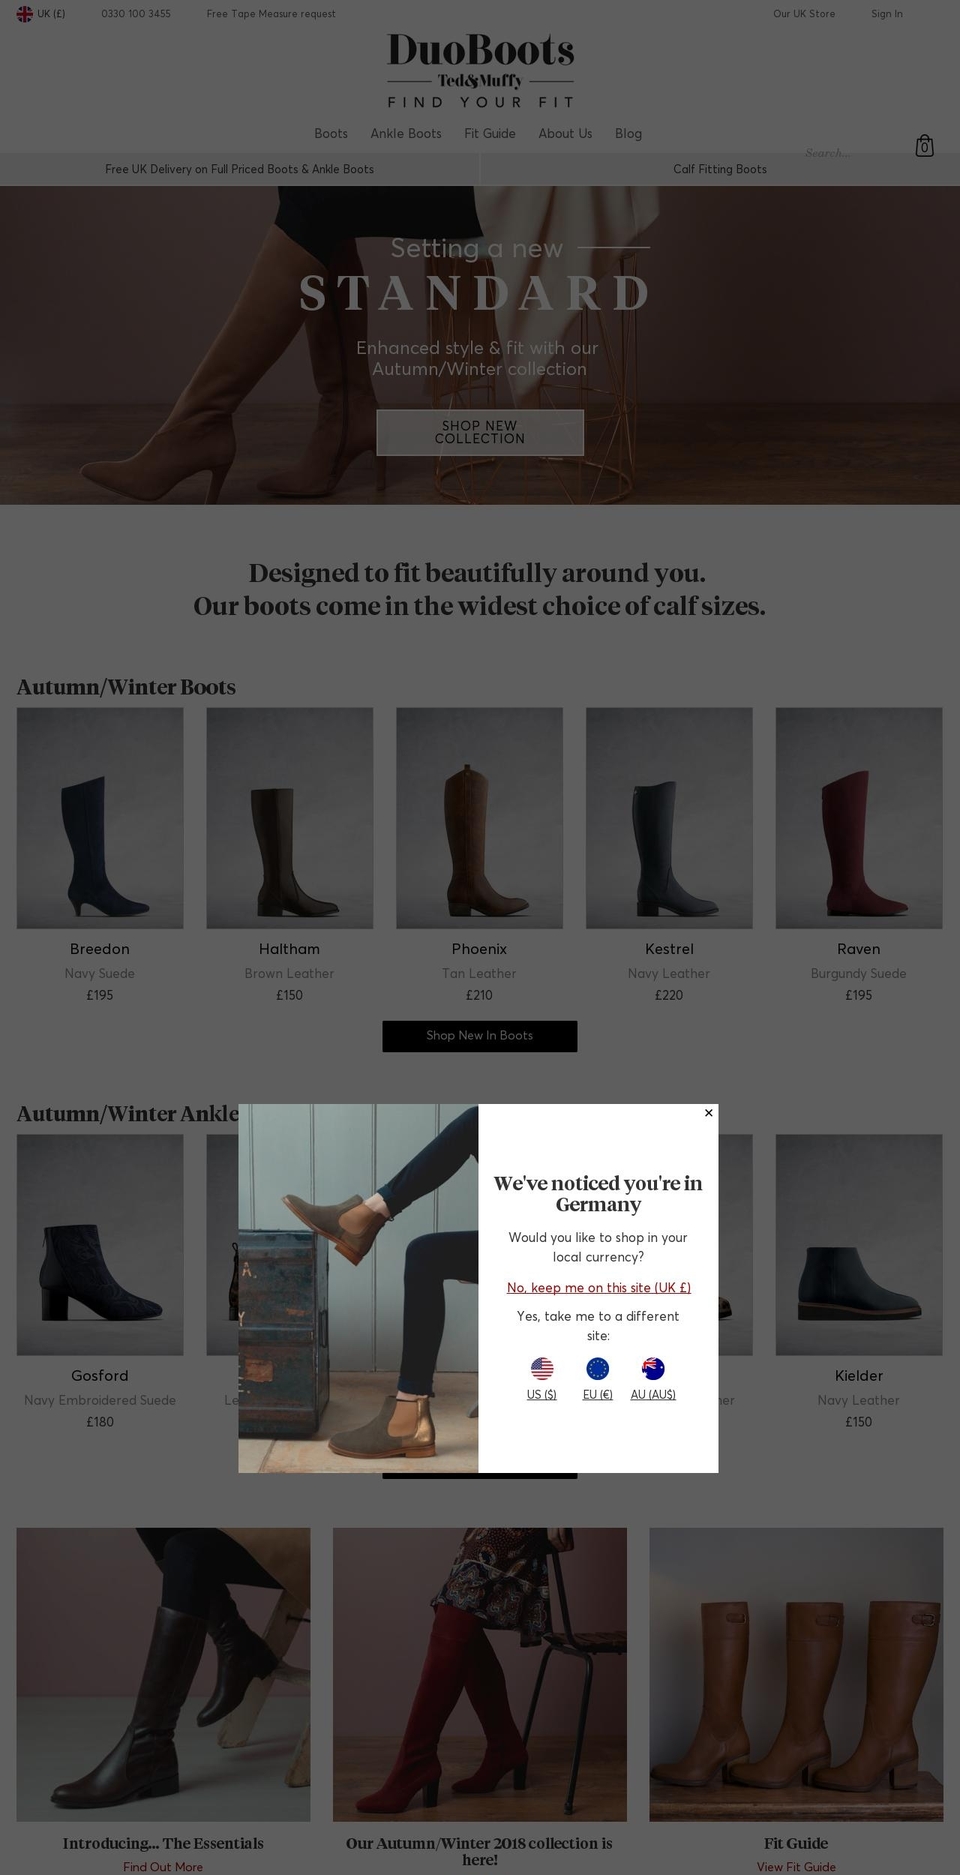 DuoBoots GBP V4.2 Shopify theme site example duoboots.luxury